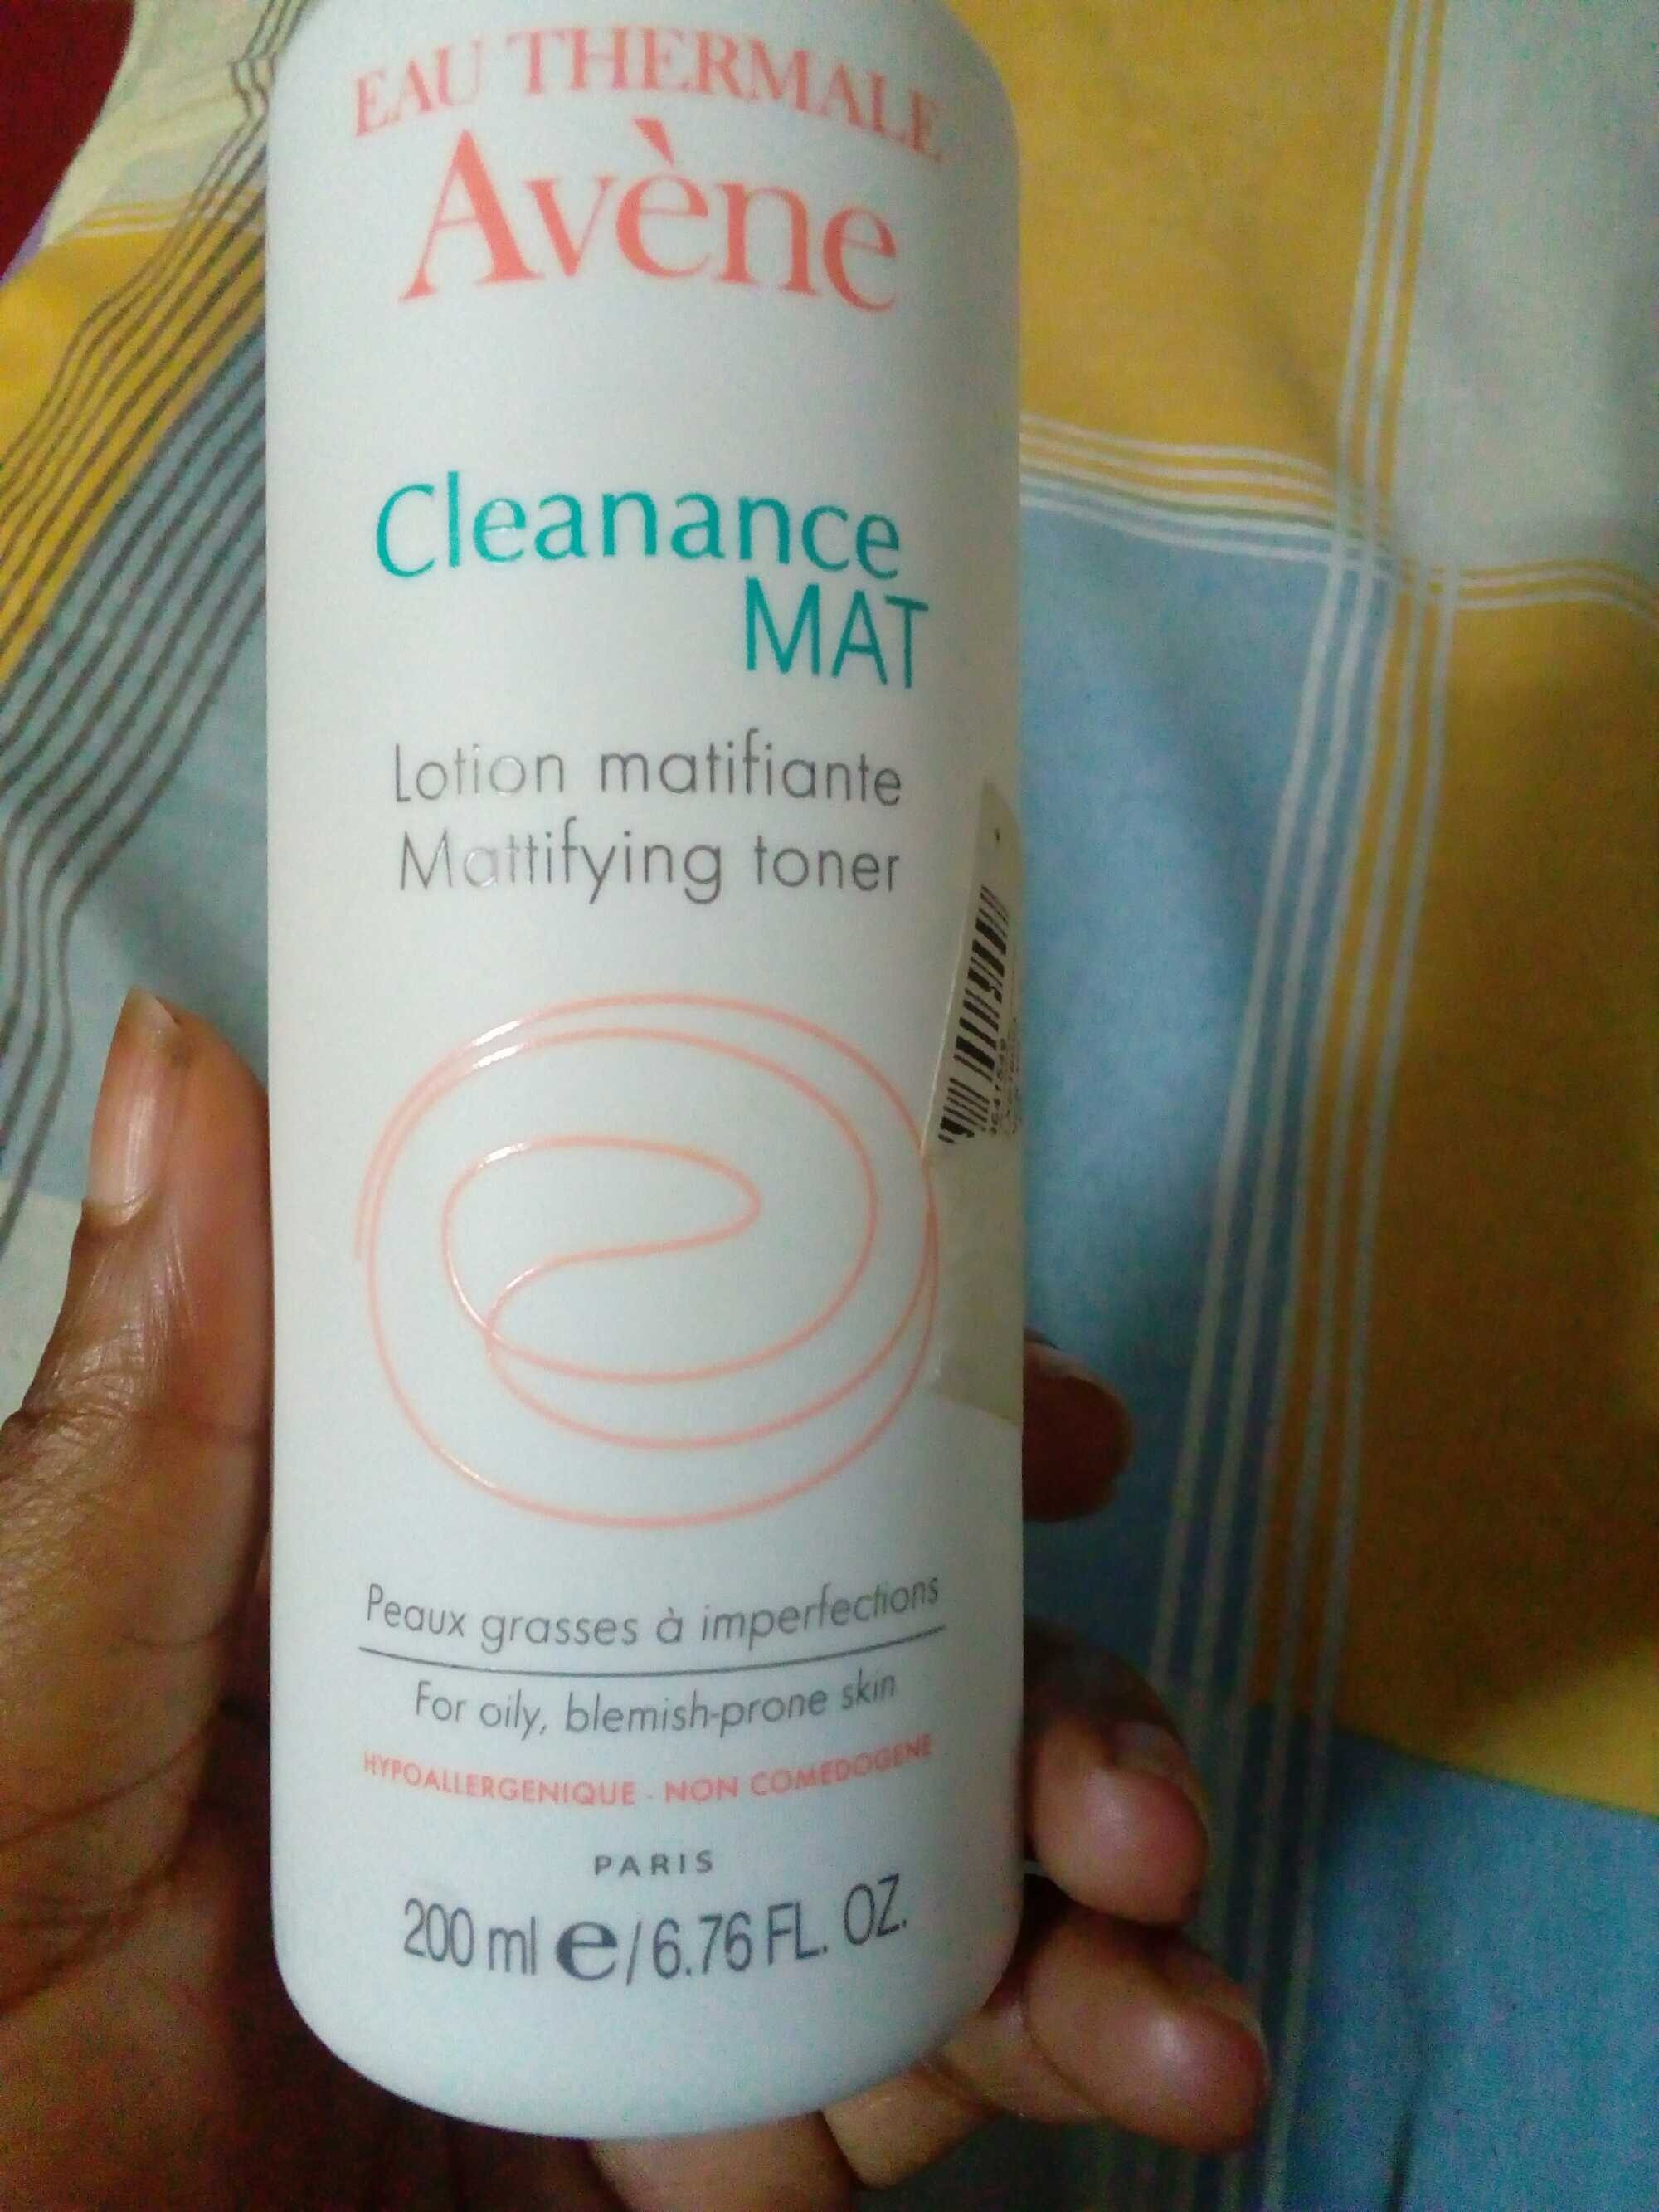 Lotion matifiante cleanance mat - Tuote - fr